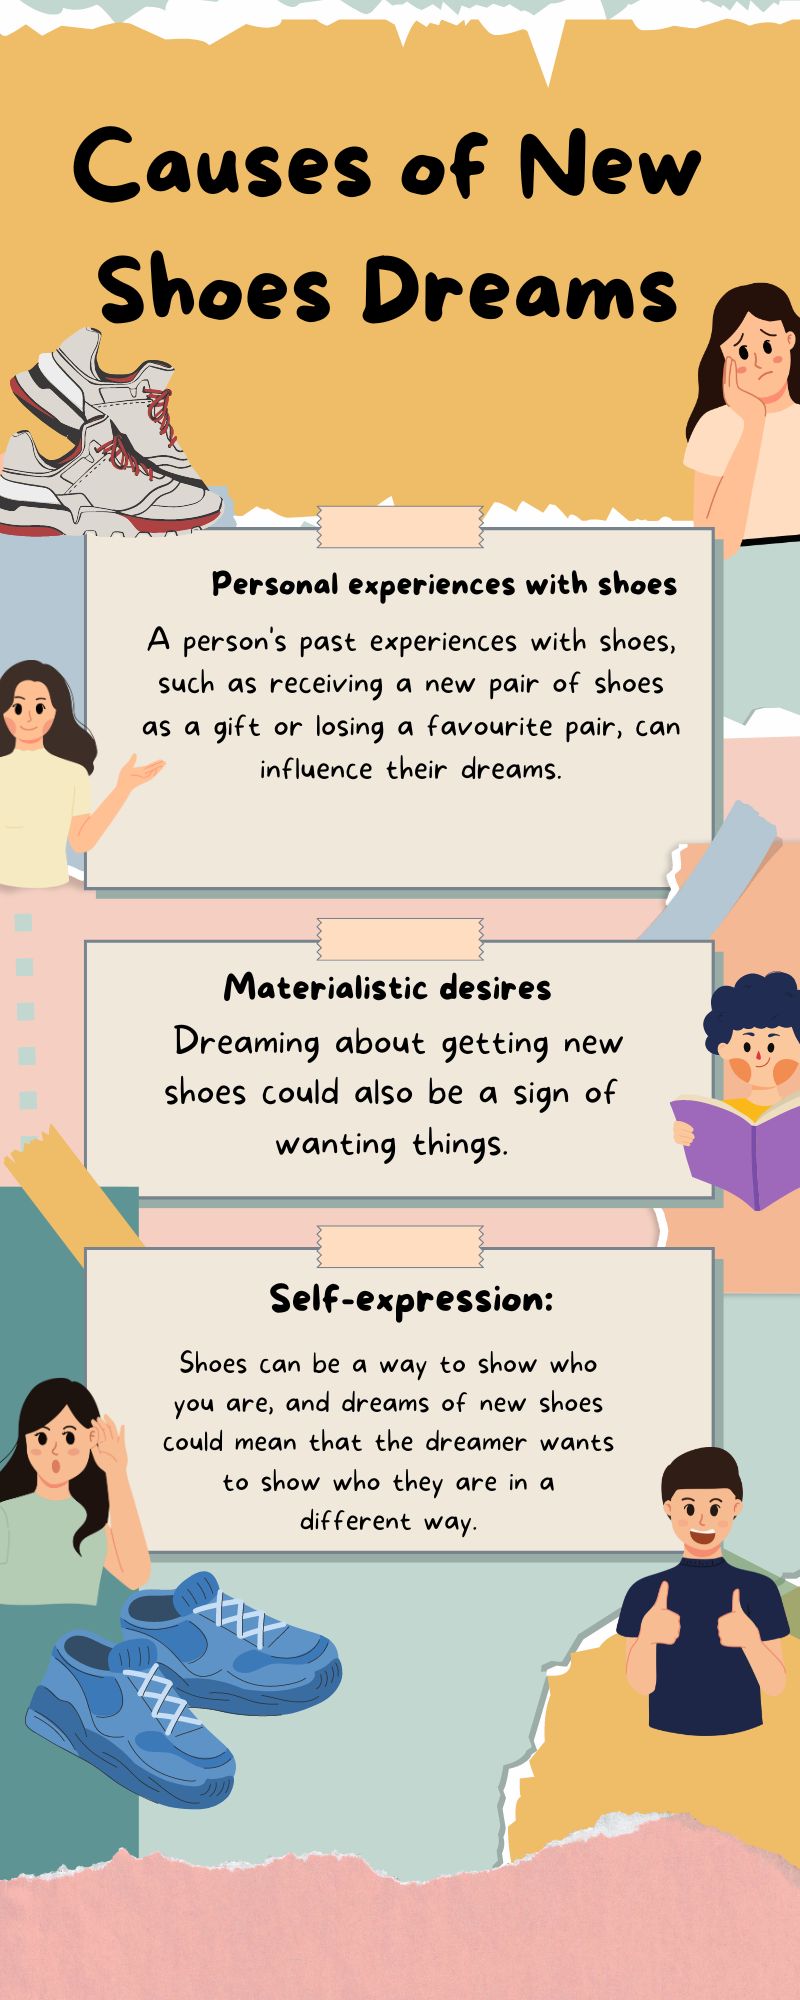 Causes of New Shoes Dreams